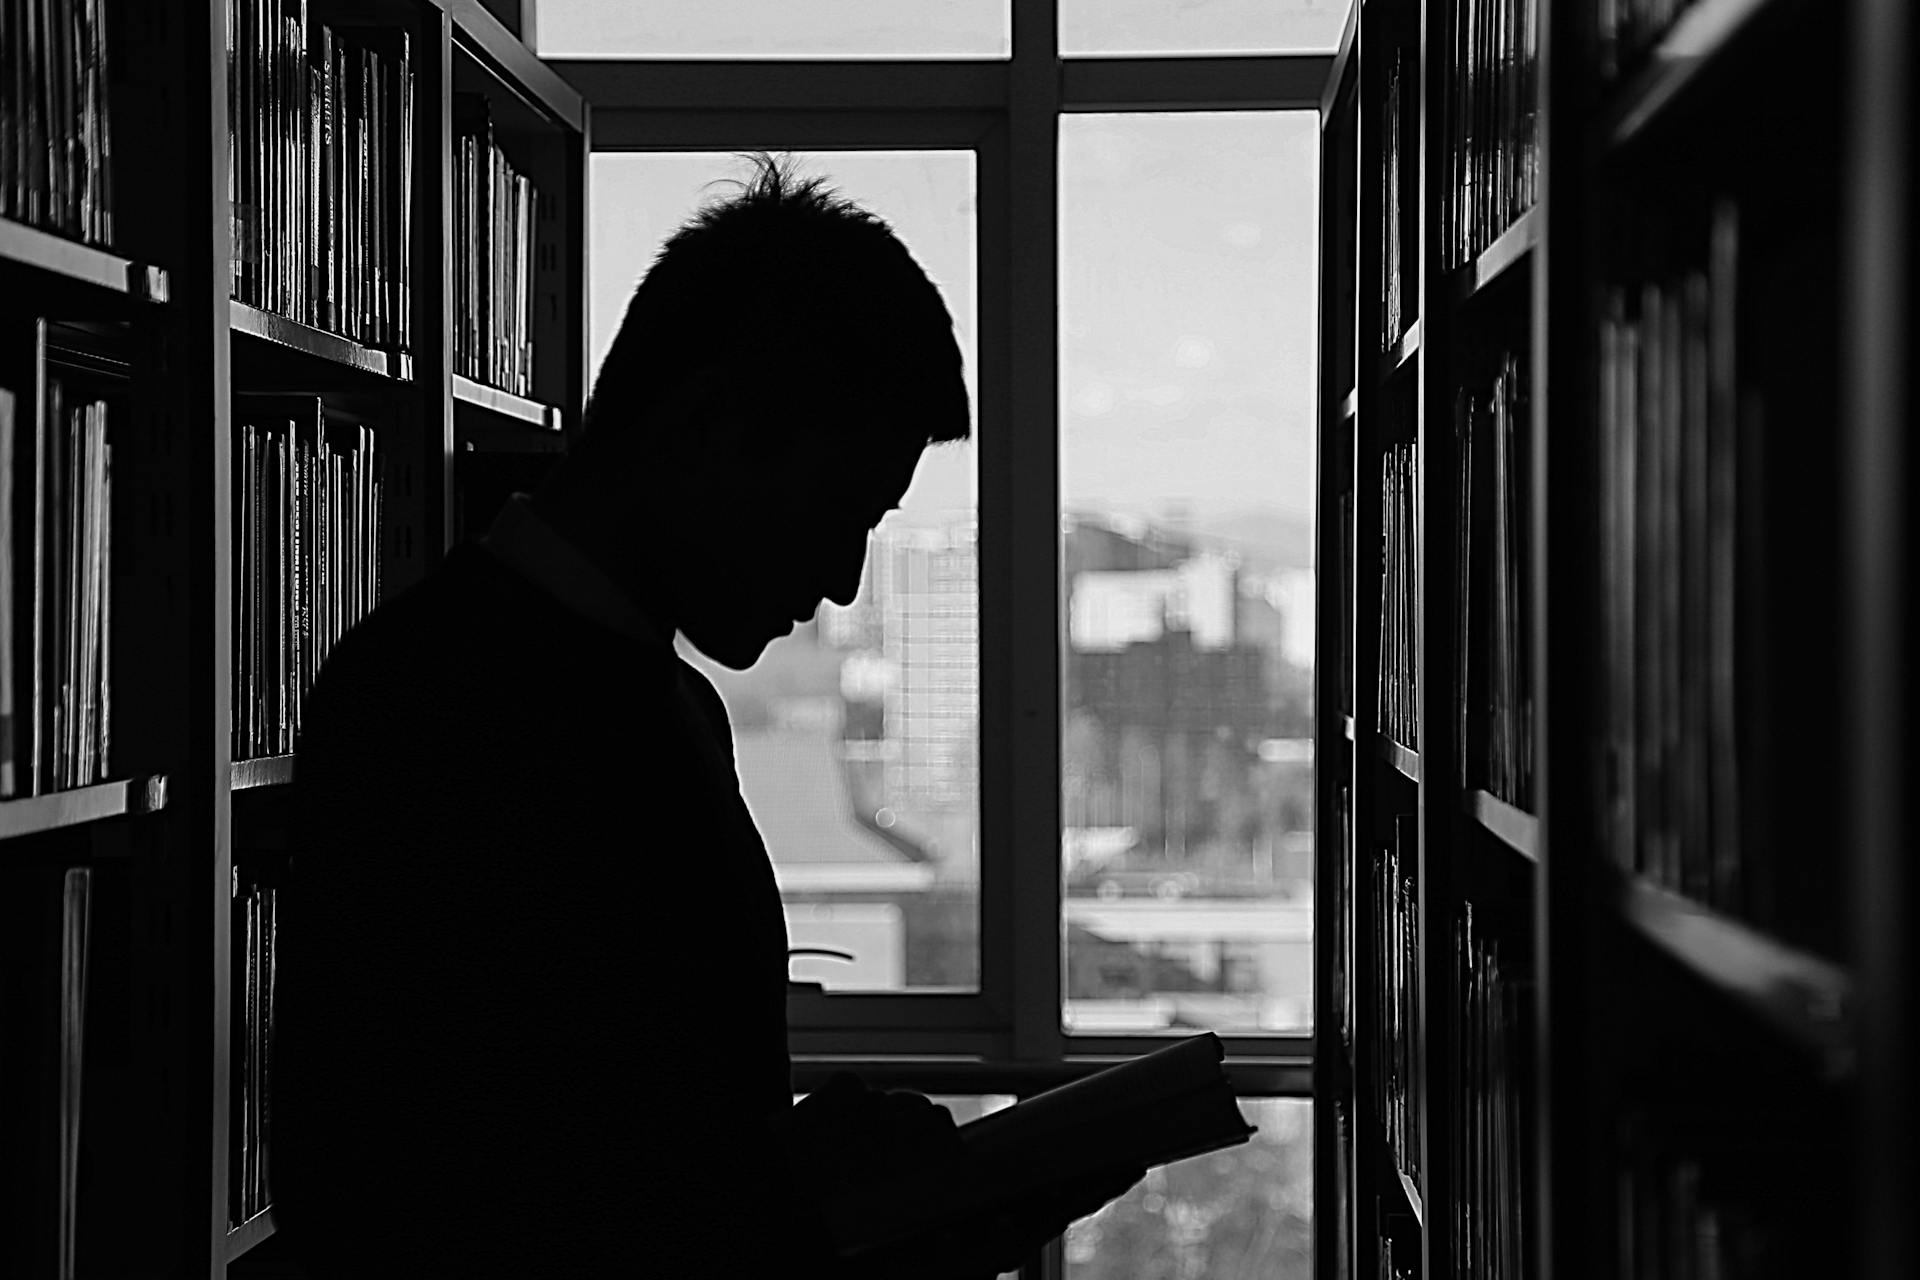 A silhouette of a man holding a book | Source: Pexels